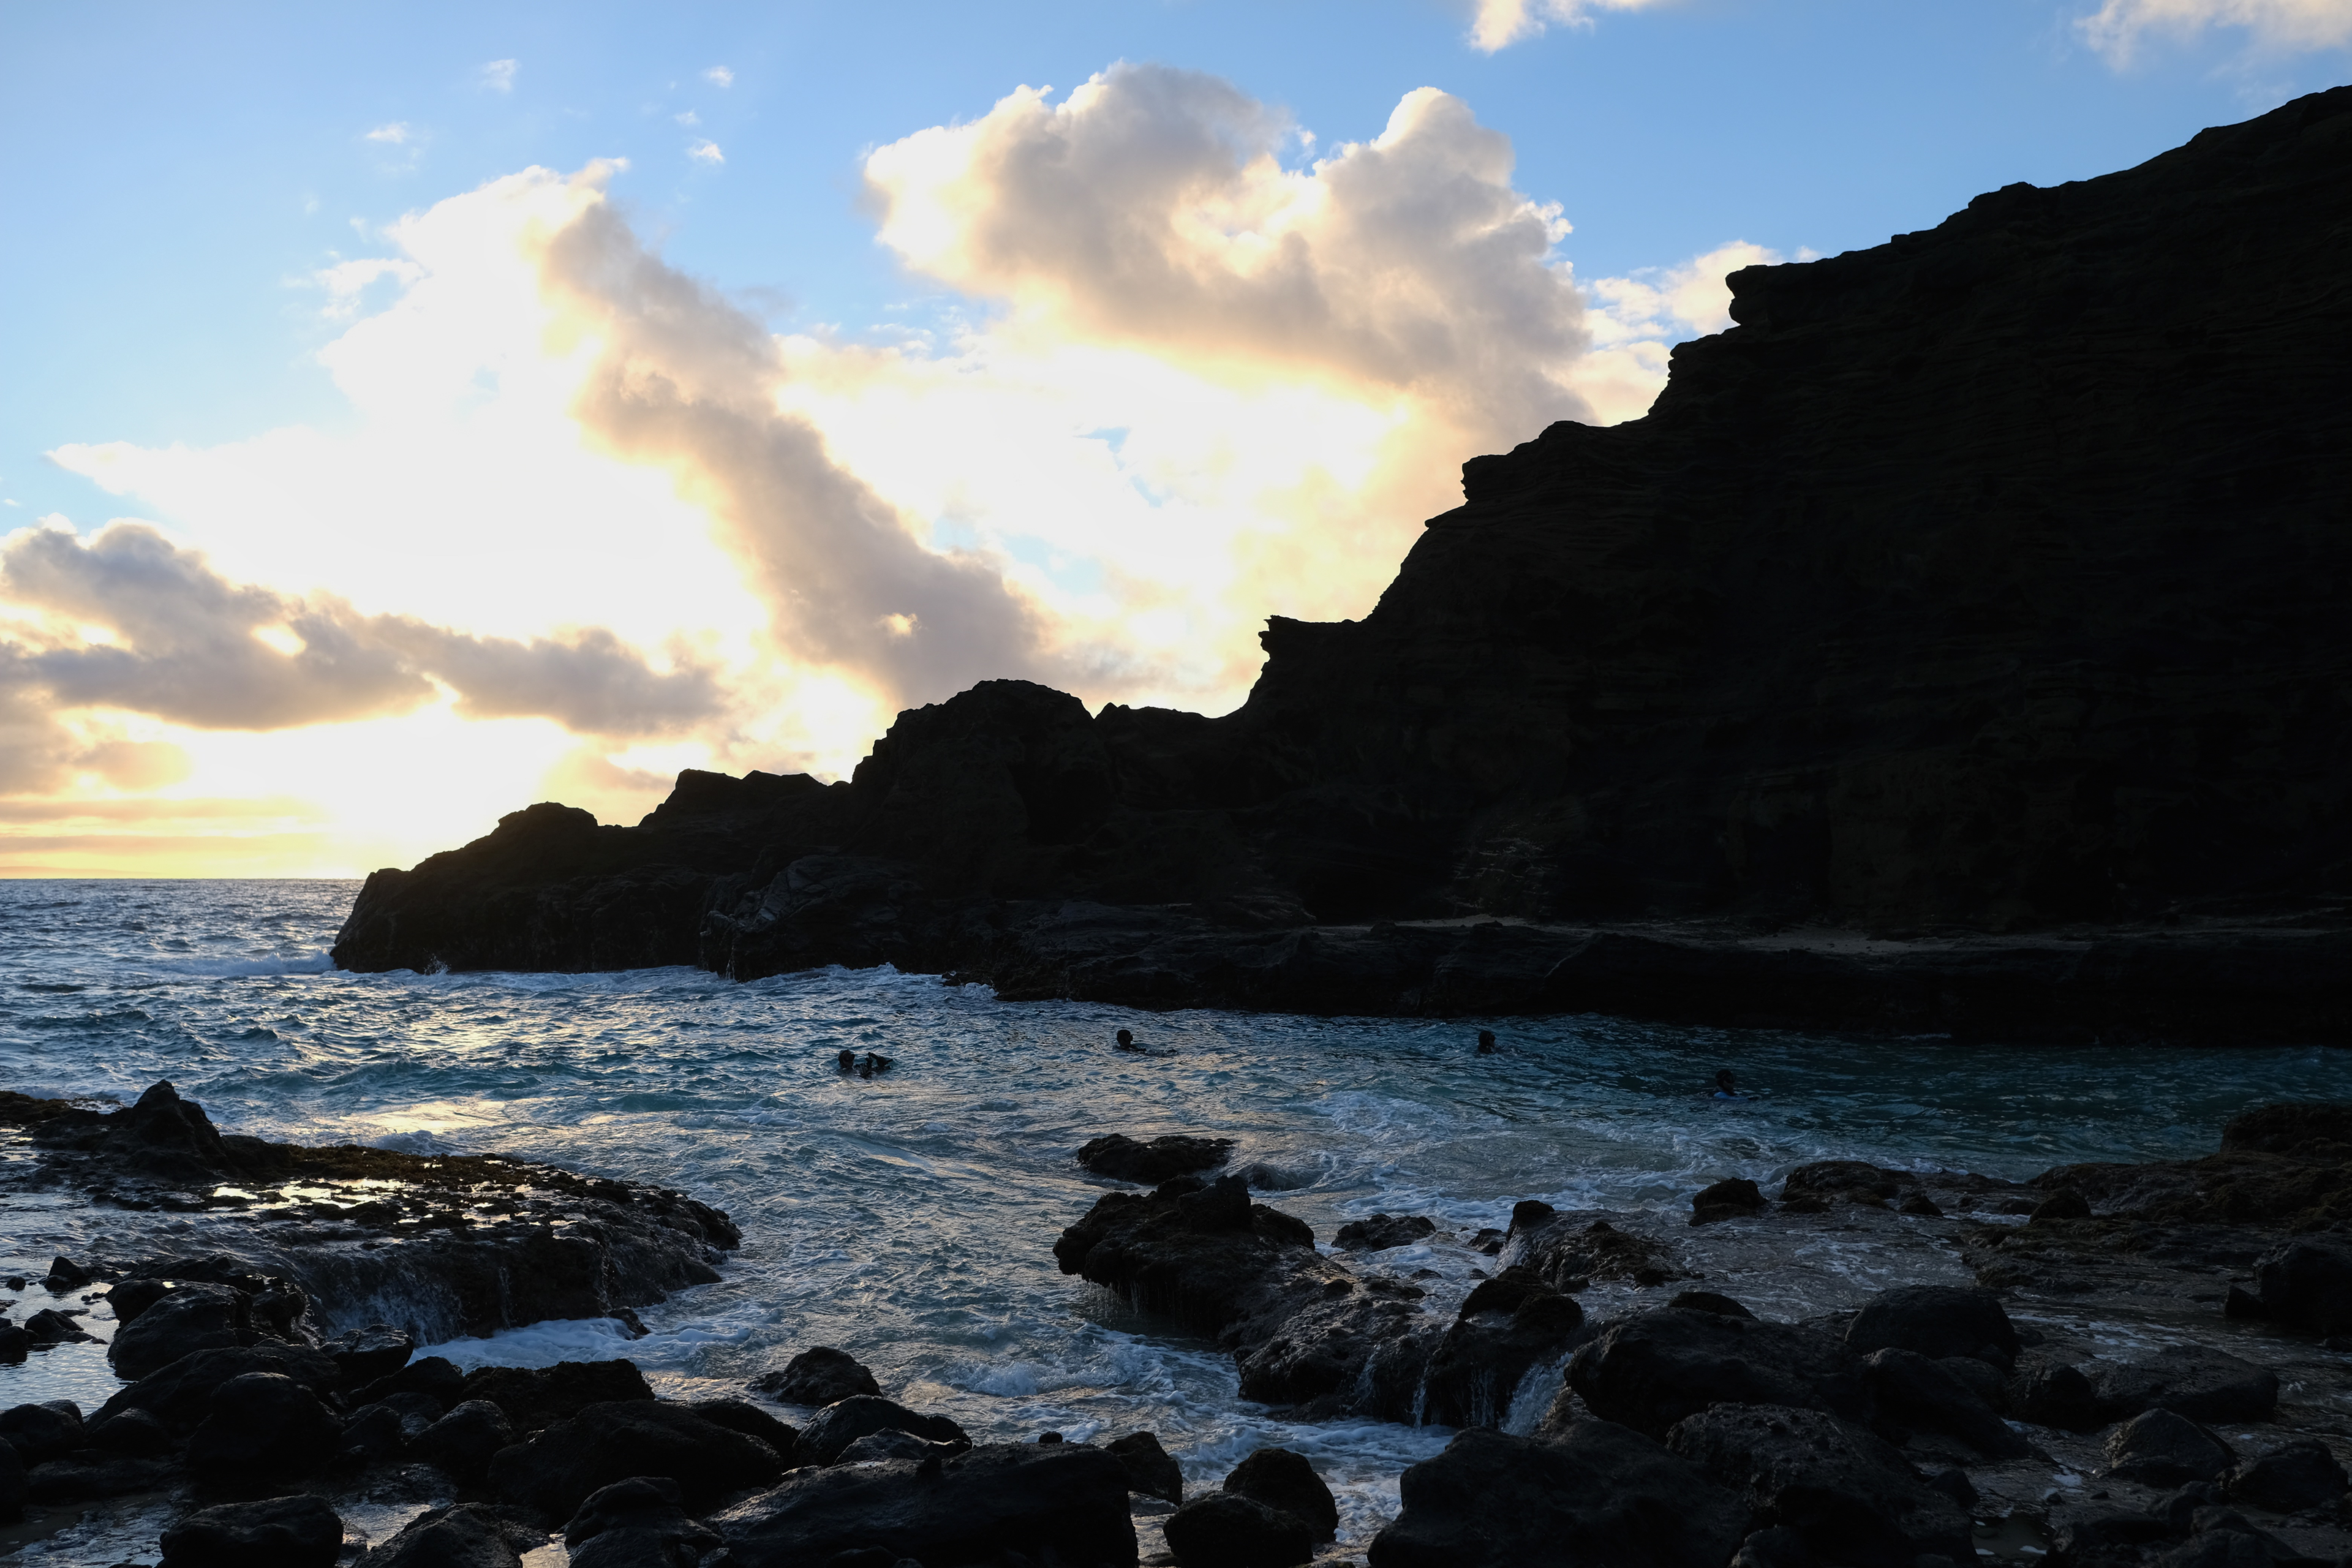 Four scuba divers slowly swimming out of a cove next to the Halona Blowhole at sunrise.